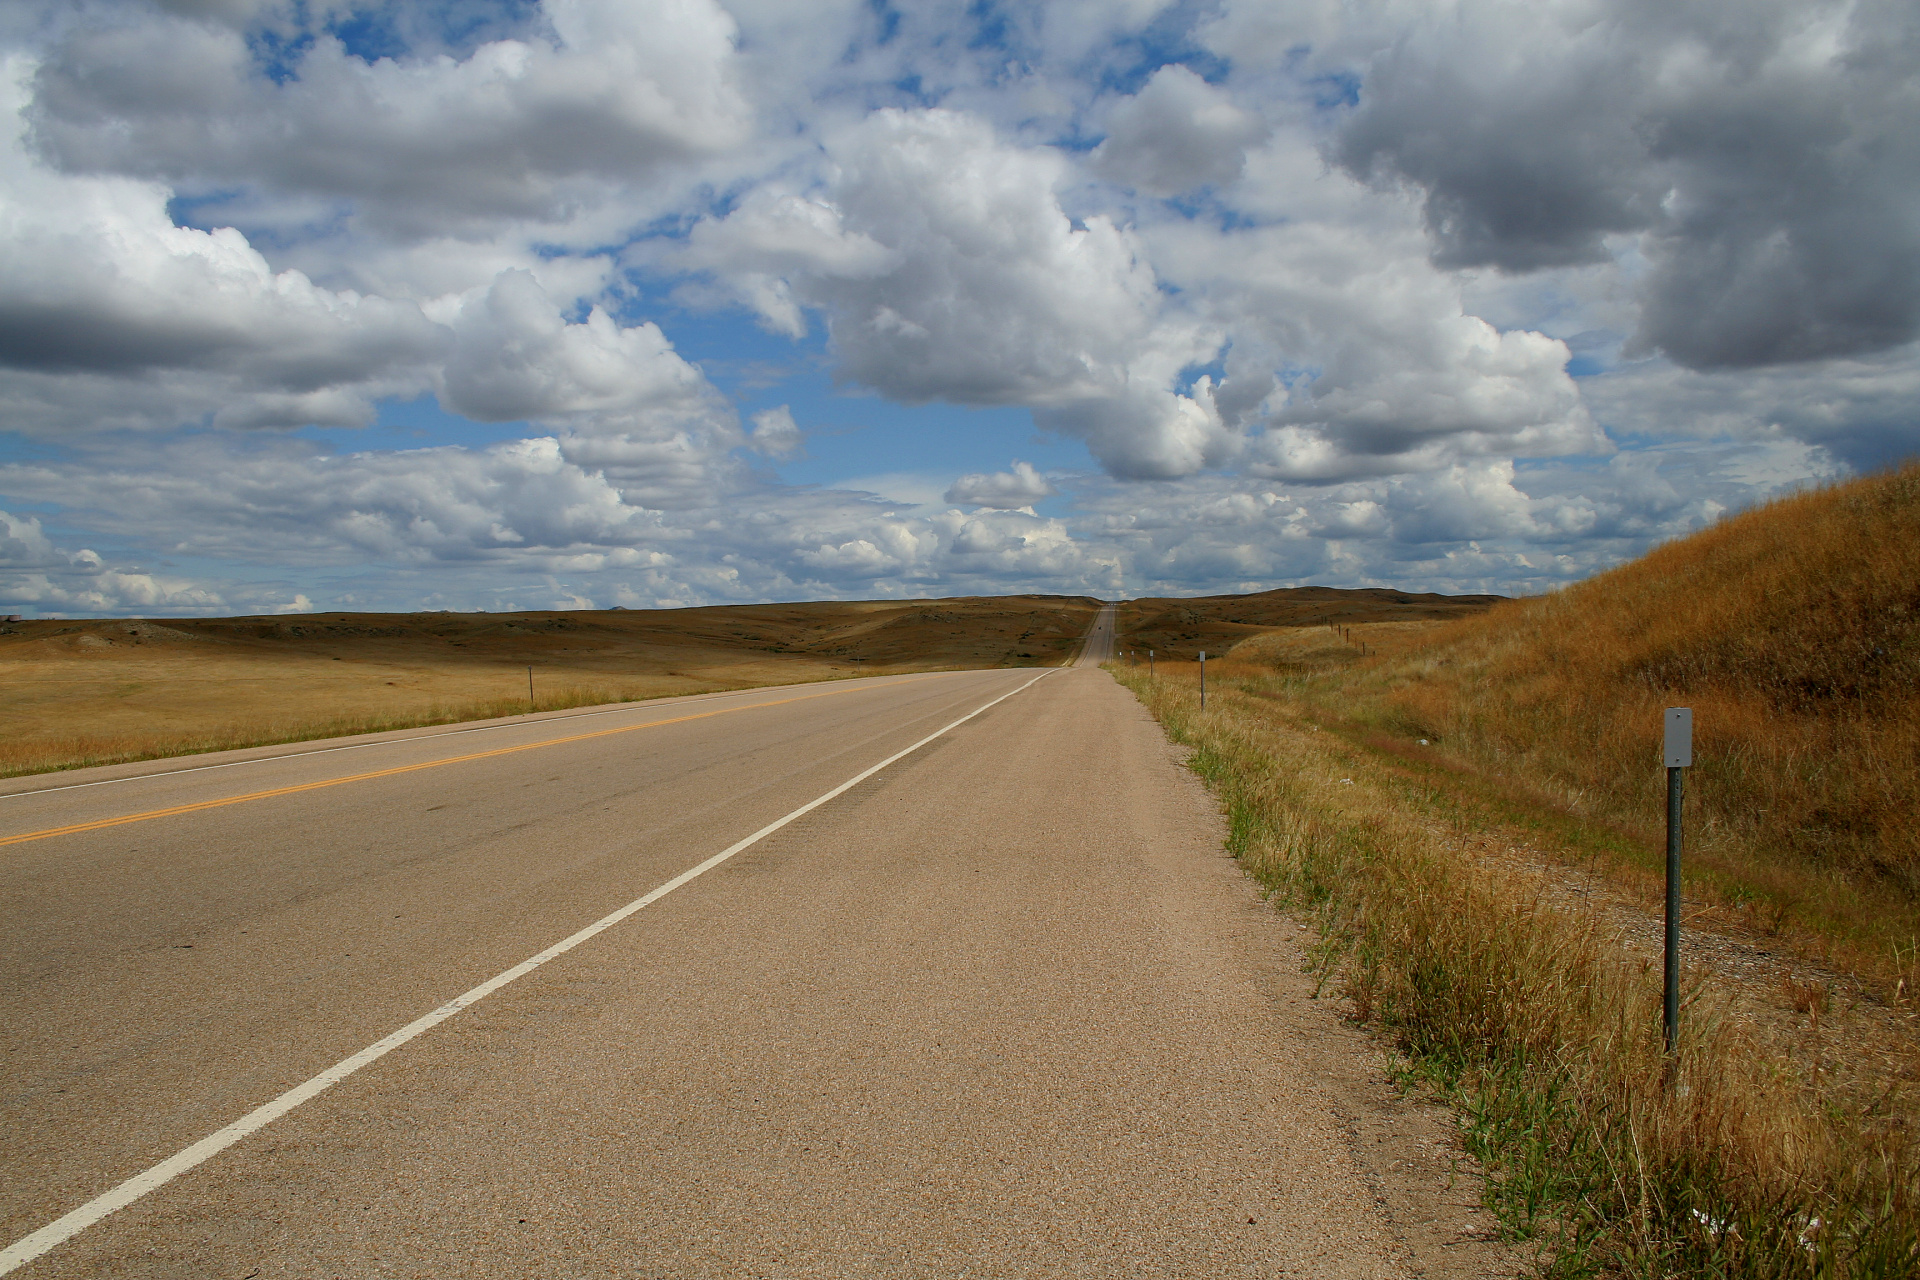 Perspective (Travels » US Trip 1: Cheyenne Country » The Journey » Route 212)